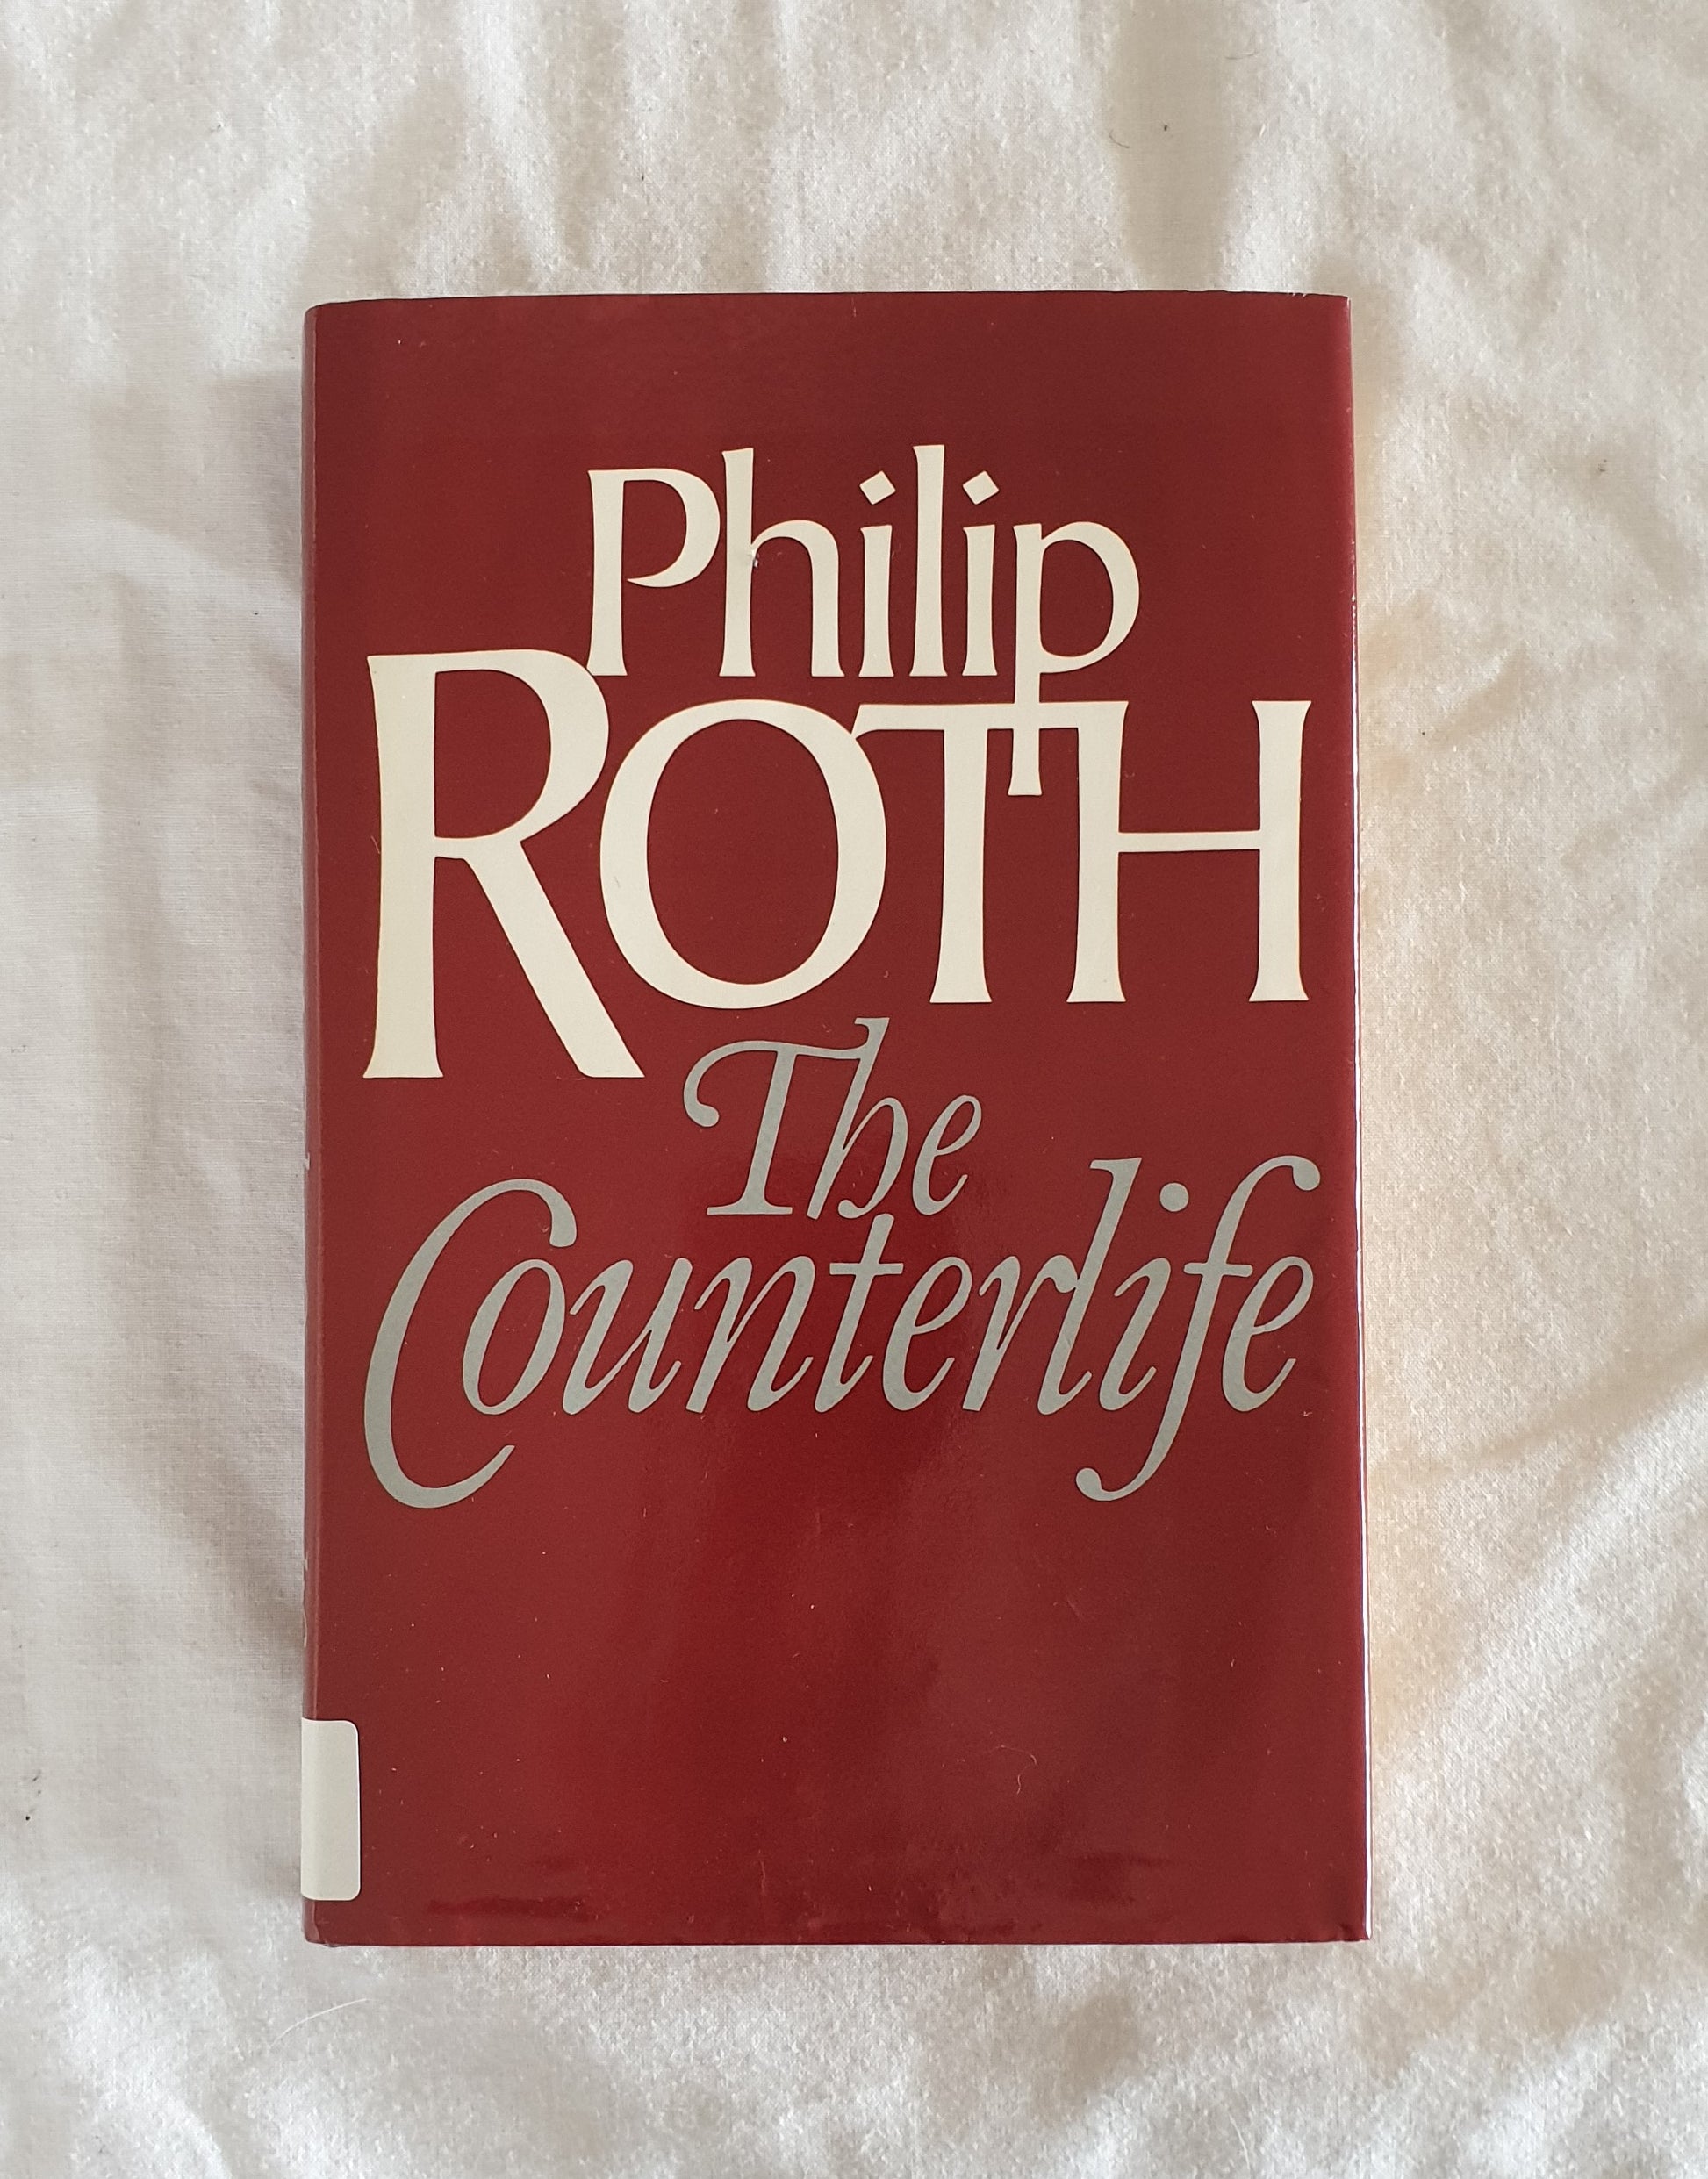 The Counterlife  by Philip Roth